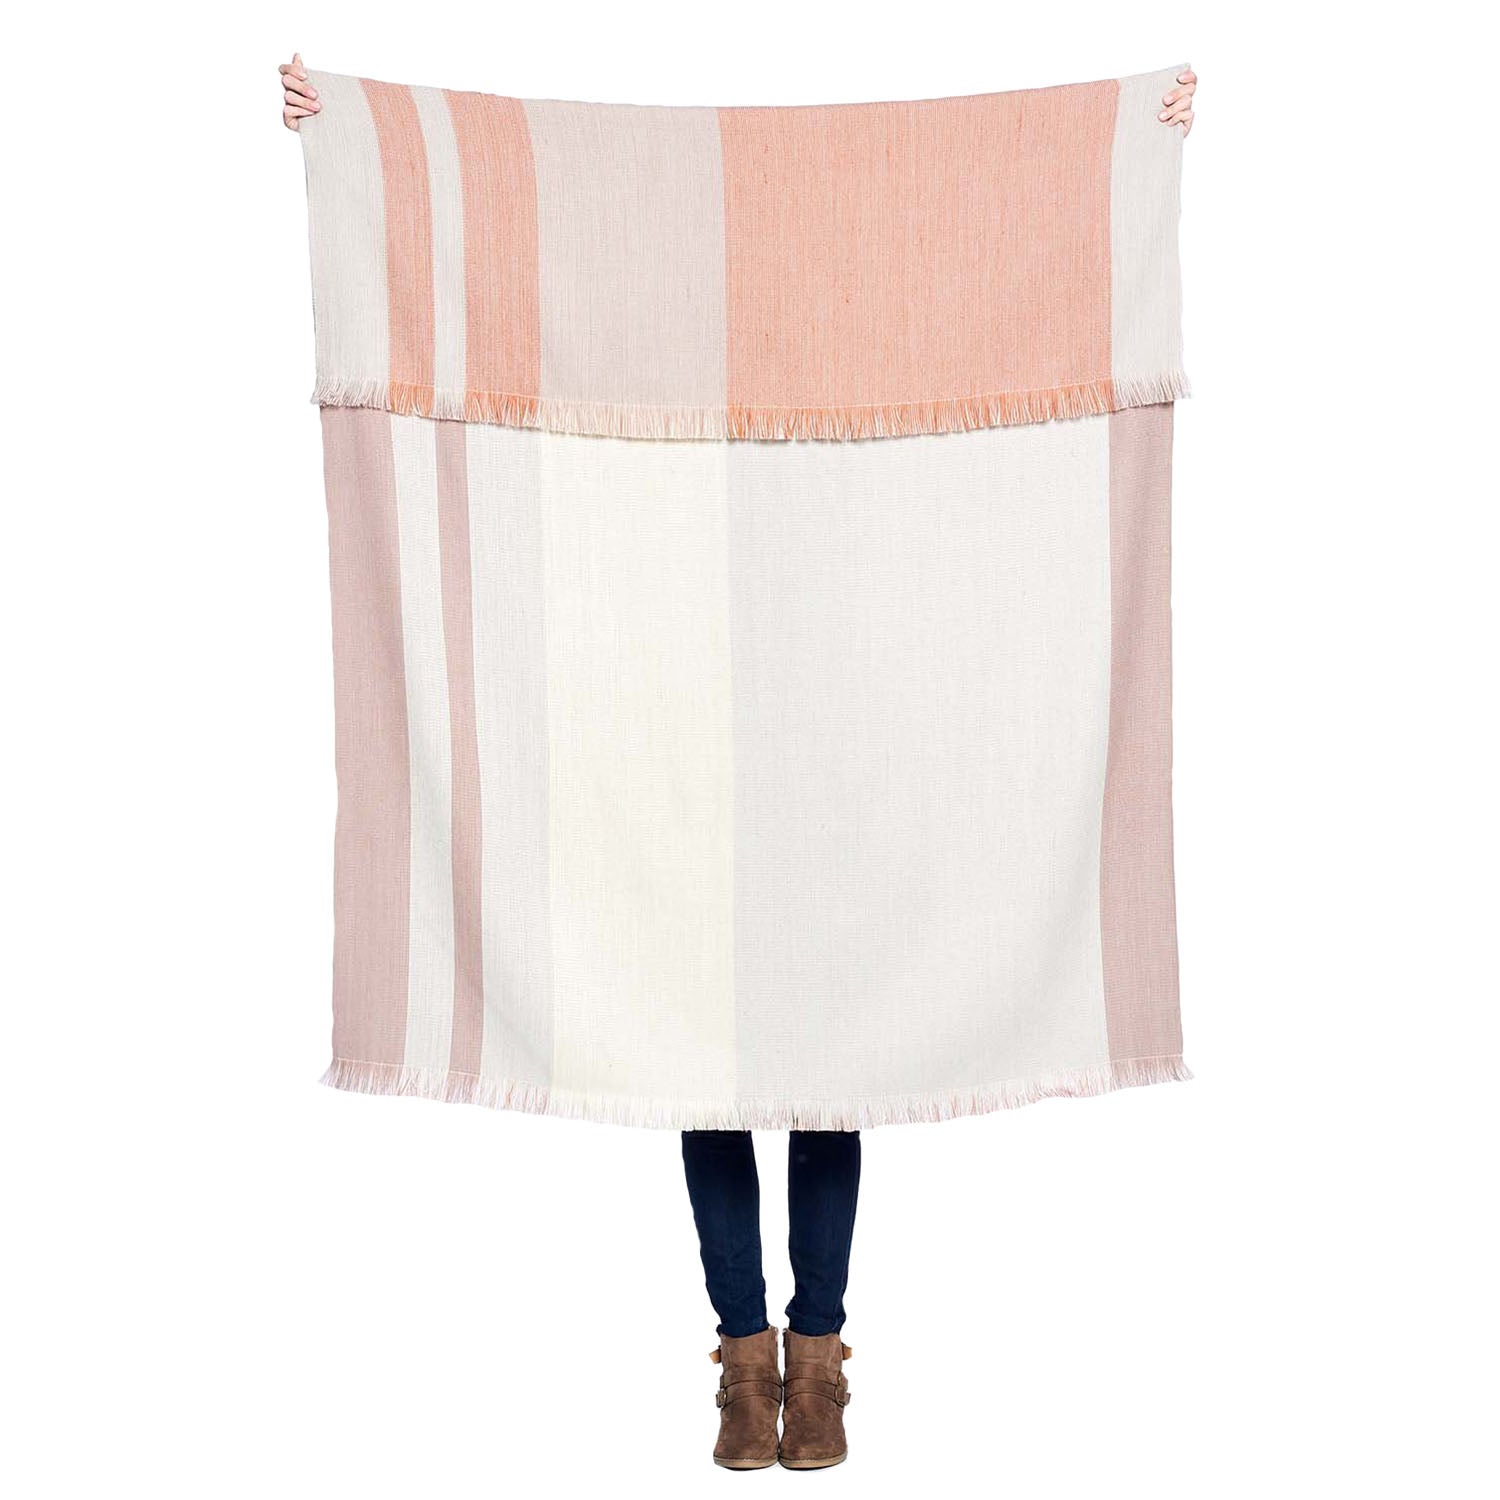 reversible lightweight blanket featuring peach and rose stripes 